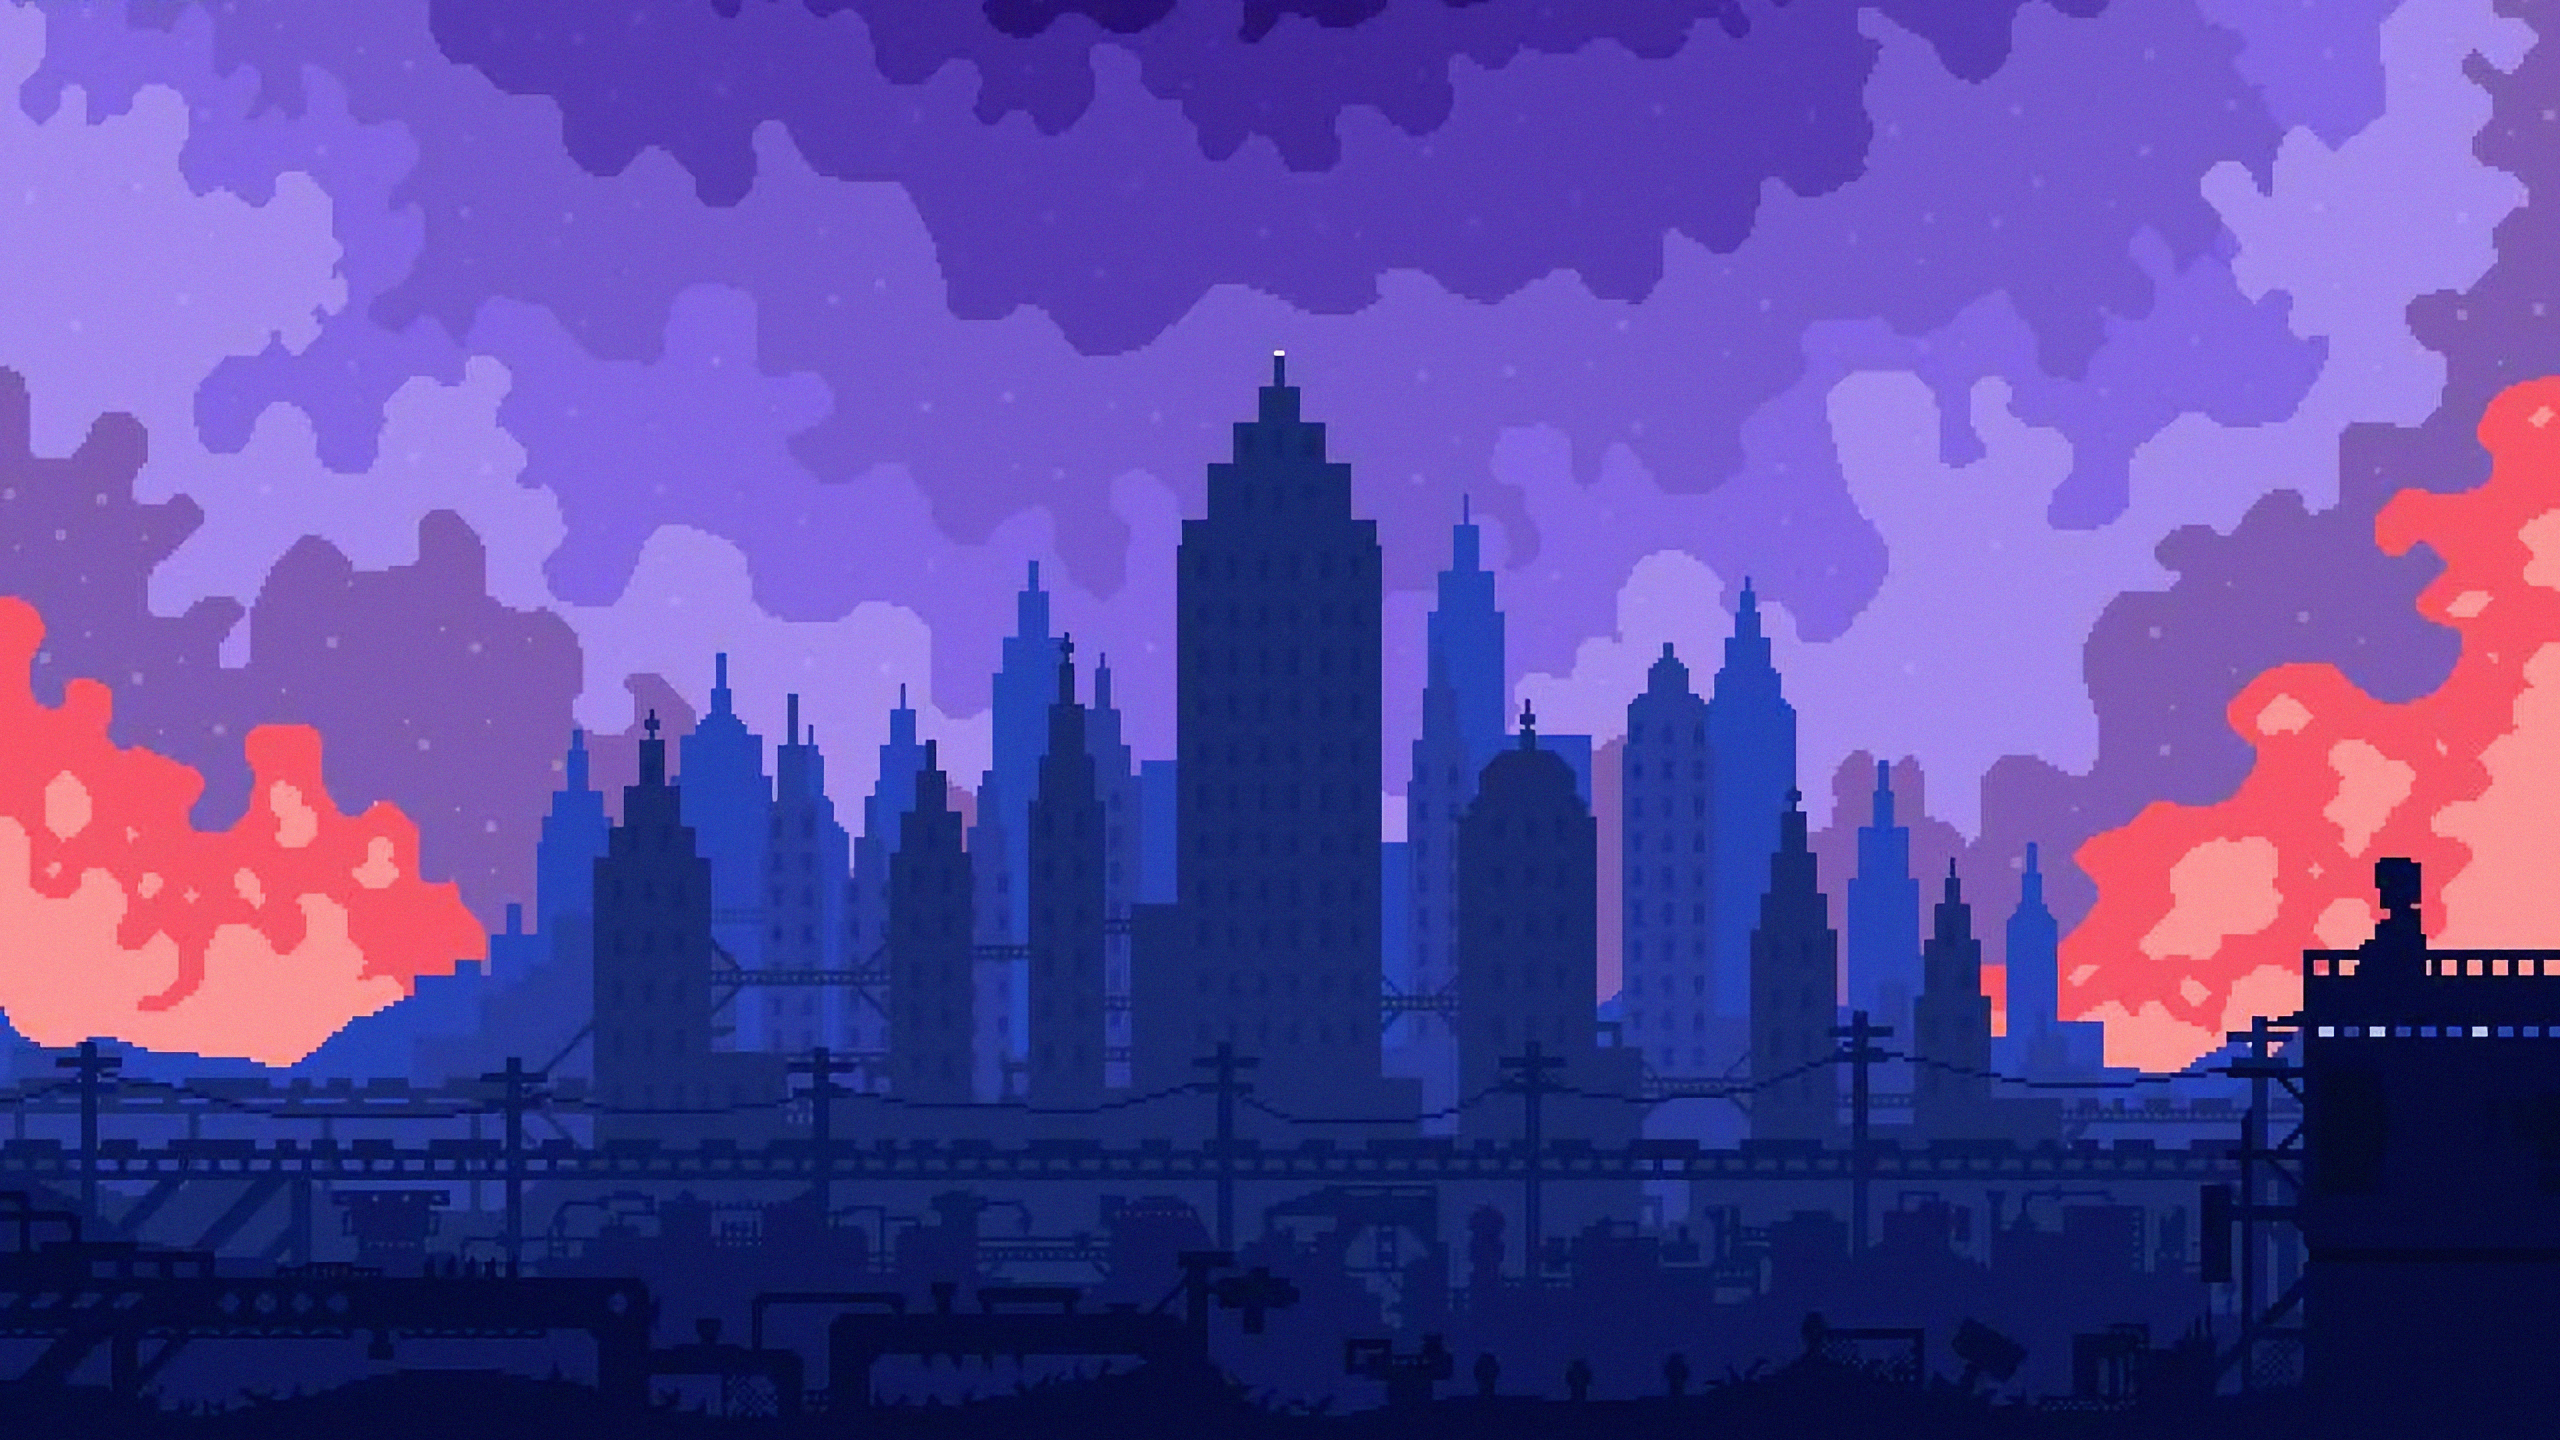 Download 2560x1440 Wallpaper High Skies Buildings Silhouette Cityscape Pixel Art Dual Wide Widescreen 16 9 Widescreen 2560x1440 Hd Image Background